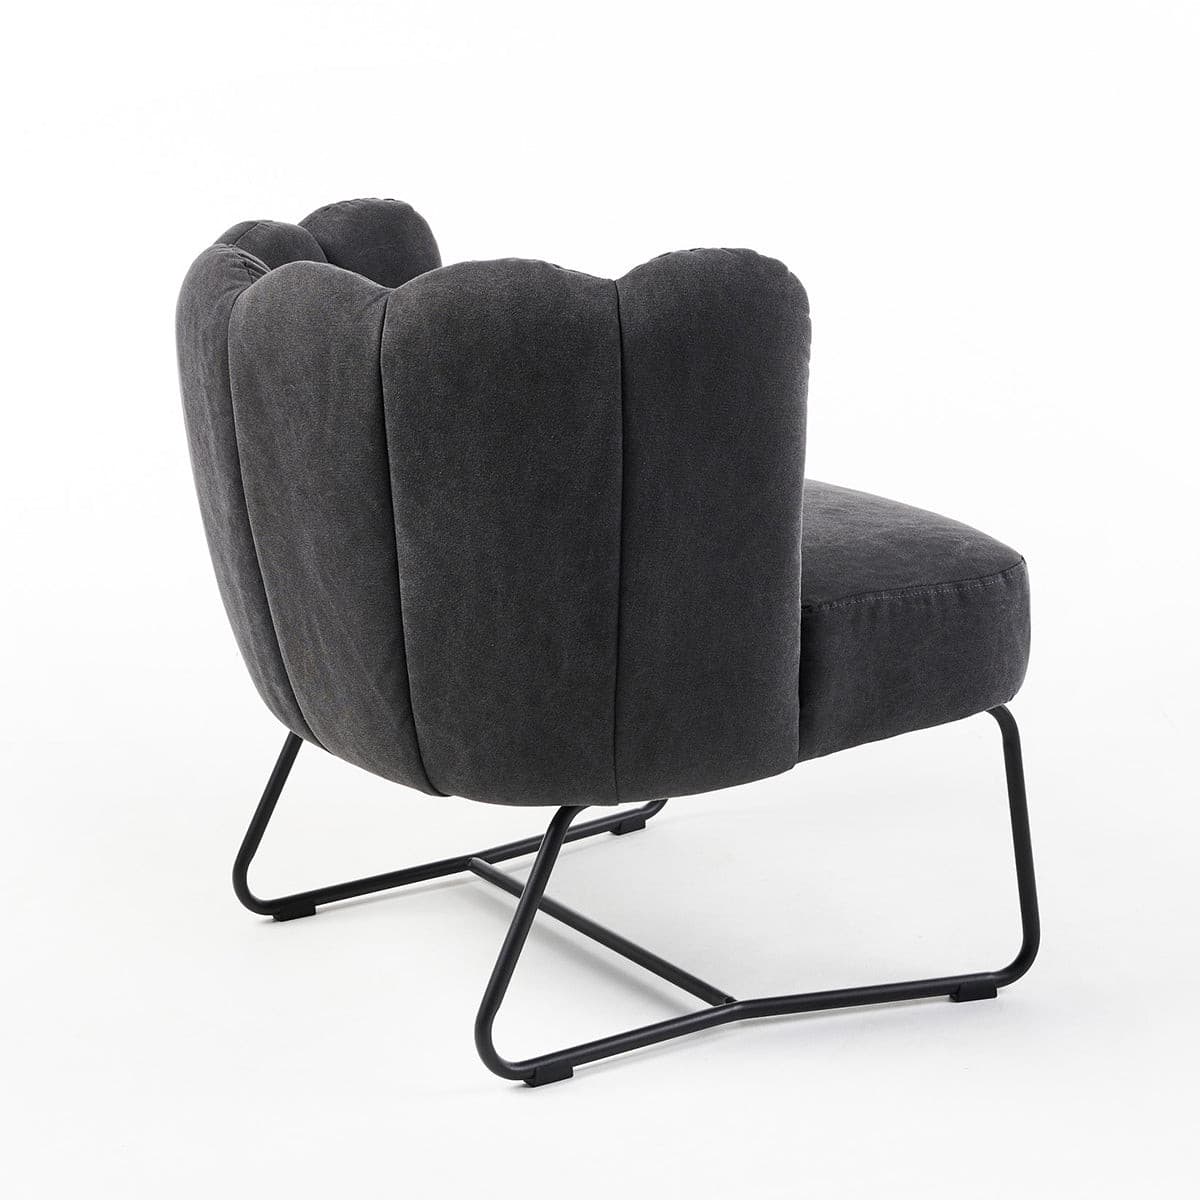 Darling Lounge Chair (Cotton Charcoal).